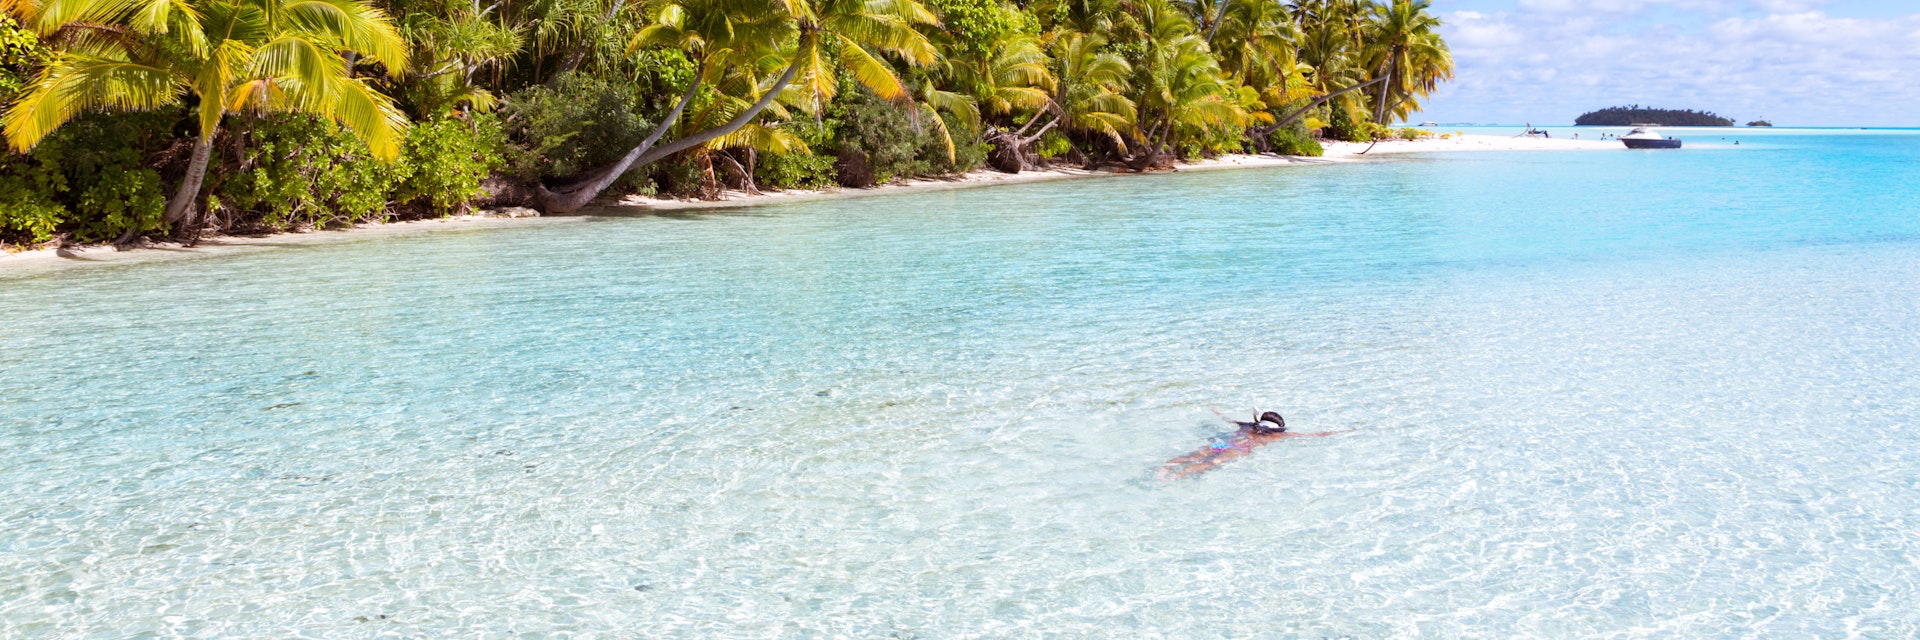 Woman in bikini snorkeling in the crystal clear water of the famous beach of Tapuaetai (One Foot Island), a small islet in the south-east of the lagoon of Aitutaki, Cook islands.